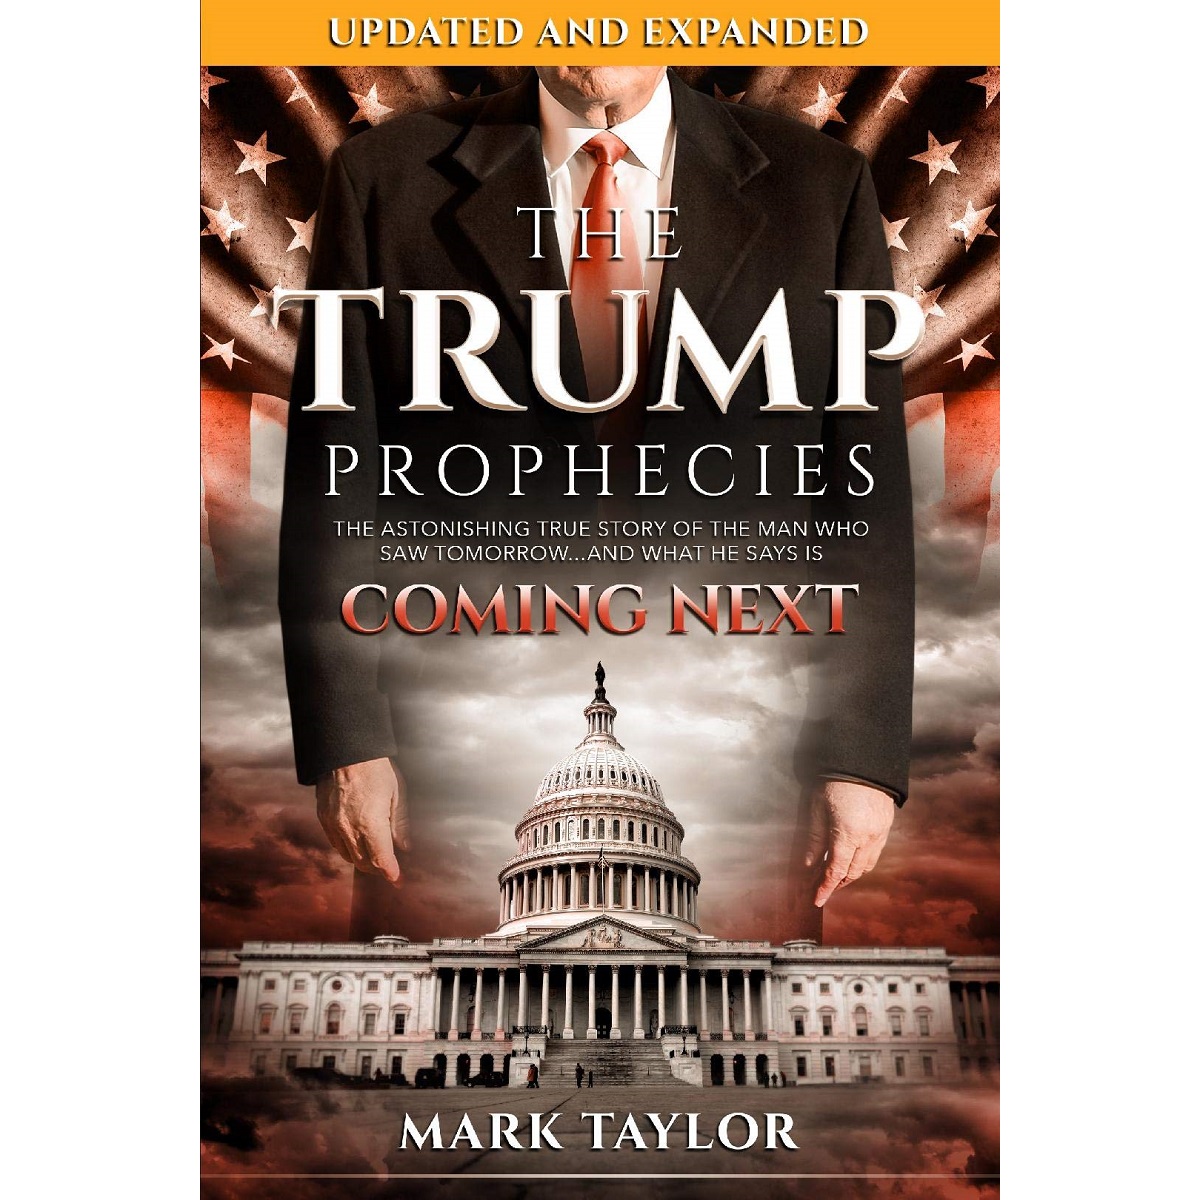 The Trump Prophecies by Mark Taylor and Mary Colbert